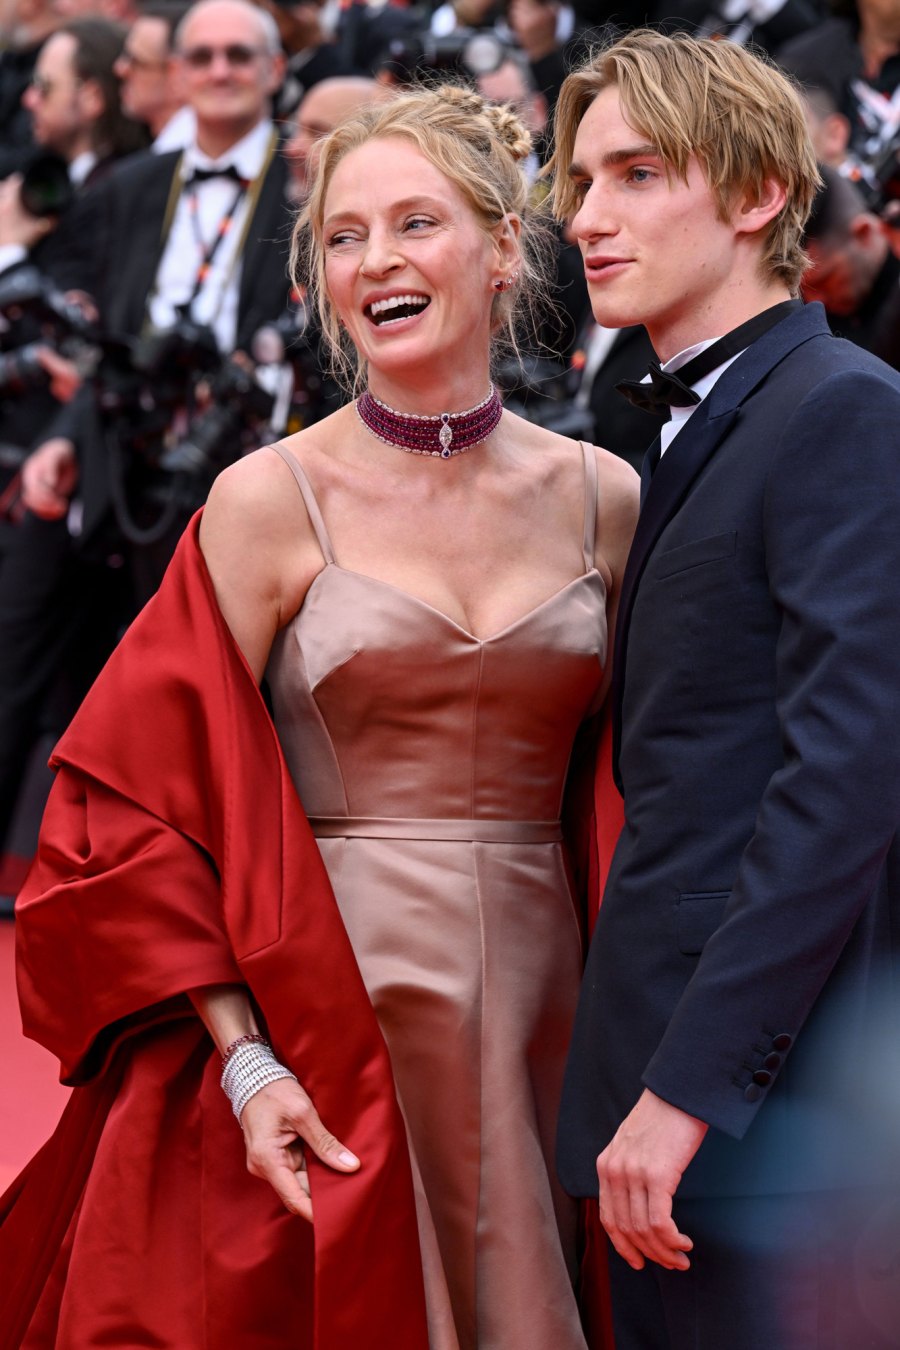 See Uma Thurman and Ethan Hawkes Son All Grown Up